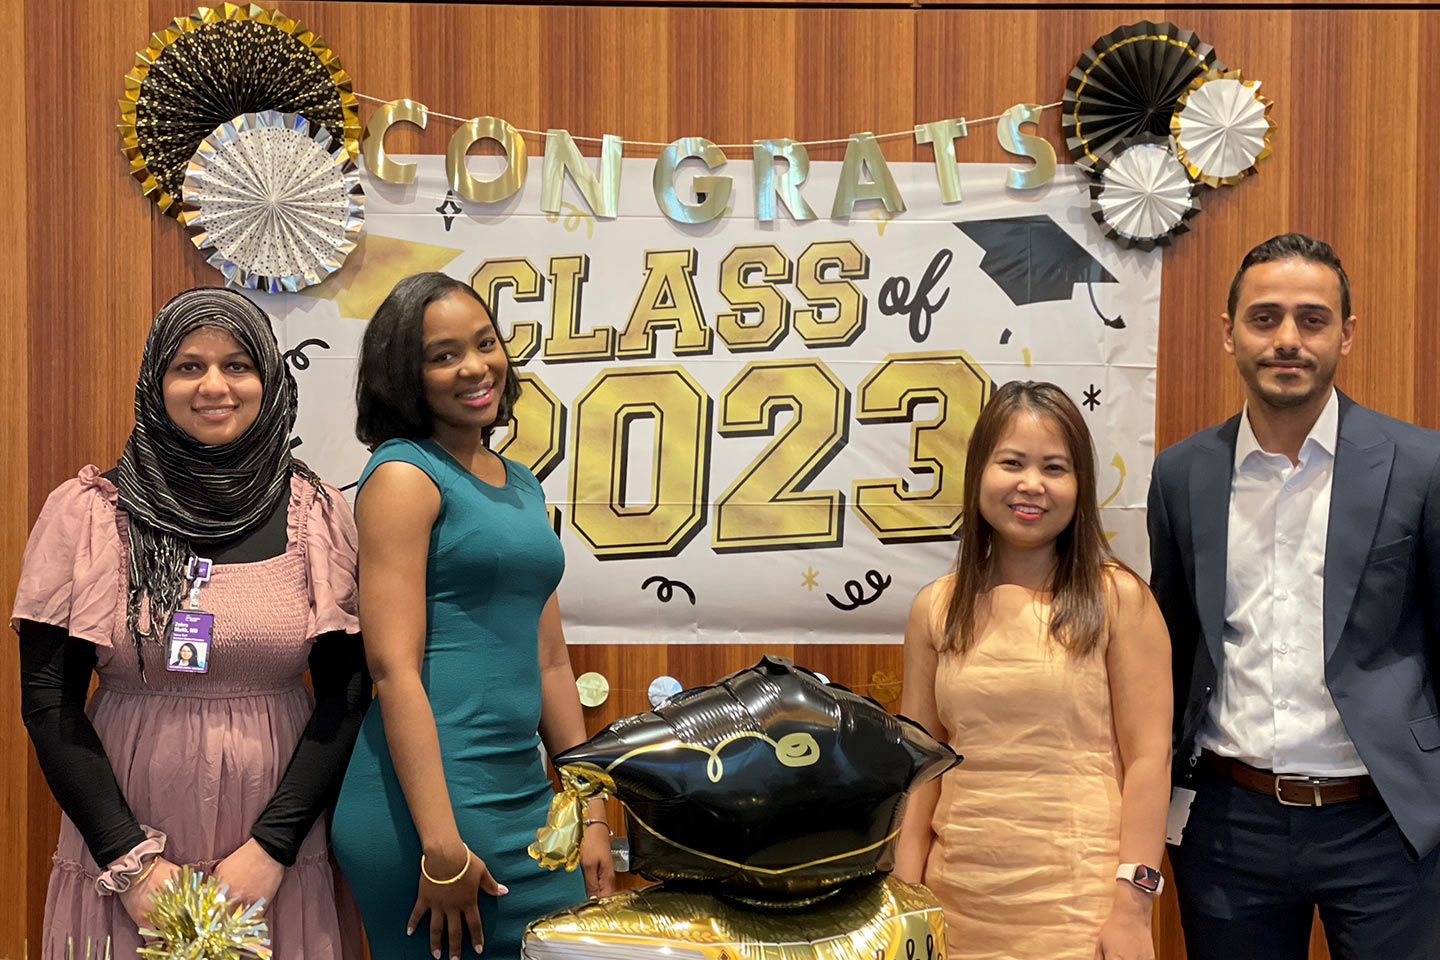 Four fellows pose in front of balloons and banners that read Congrats Class of 2023